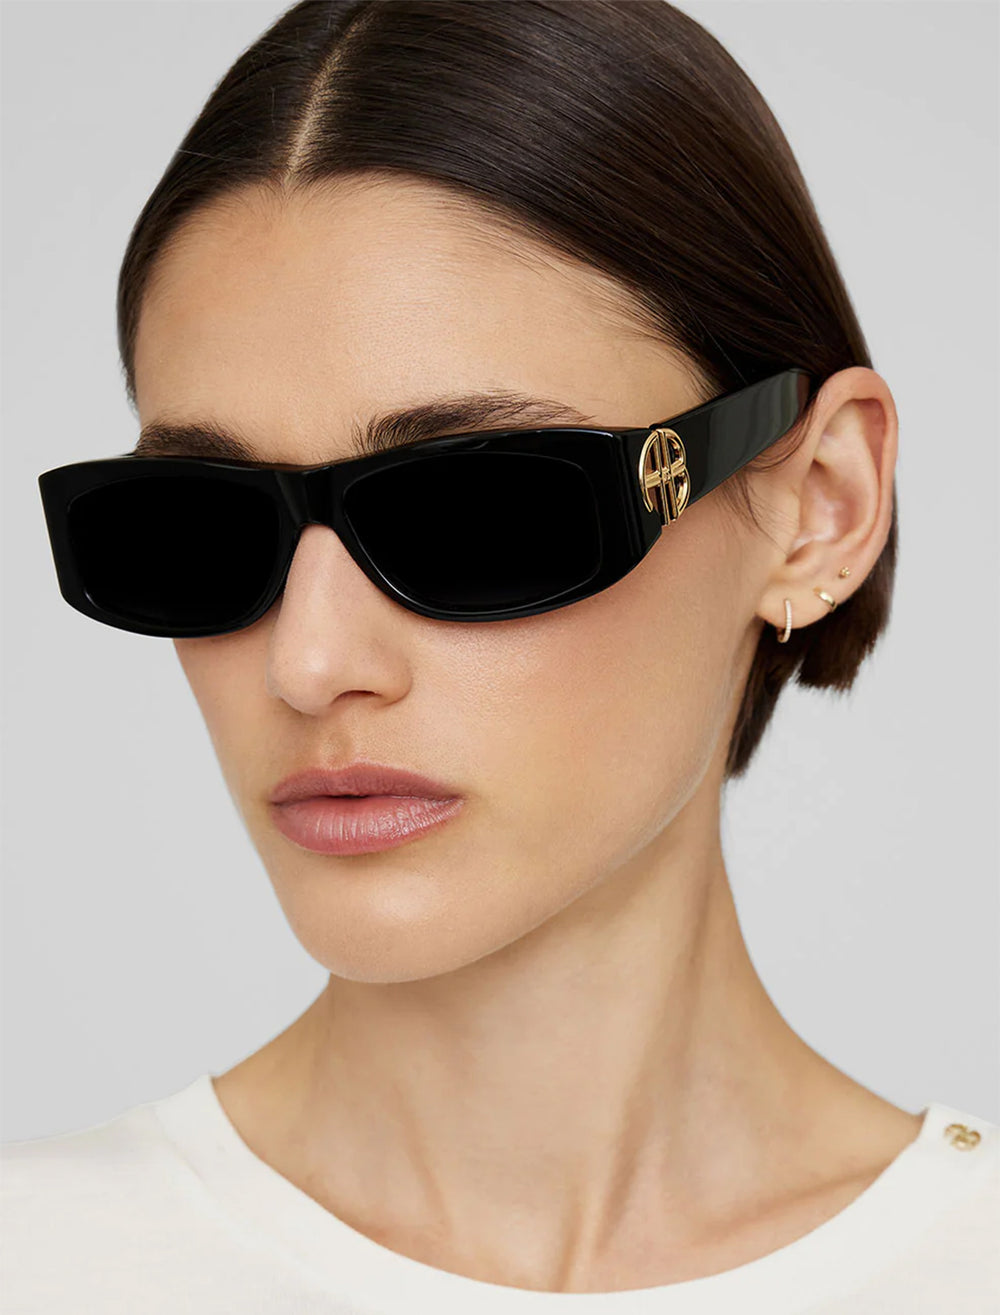 Model wearing Anine Bing's siena sunglasses in black and gold.